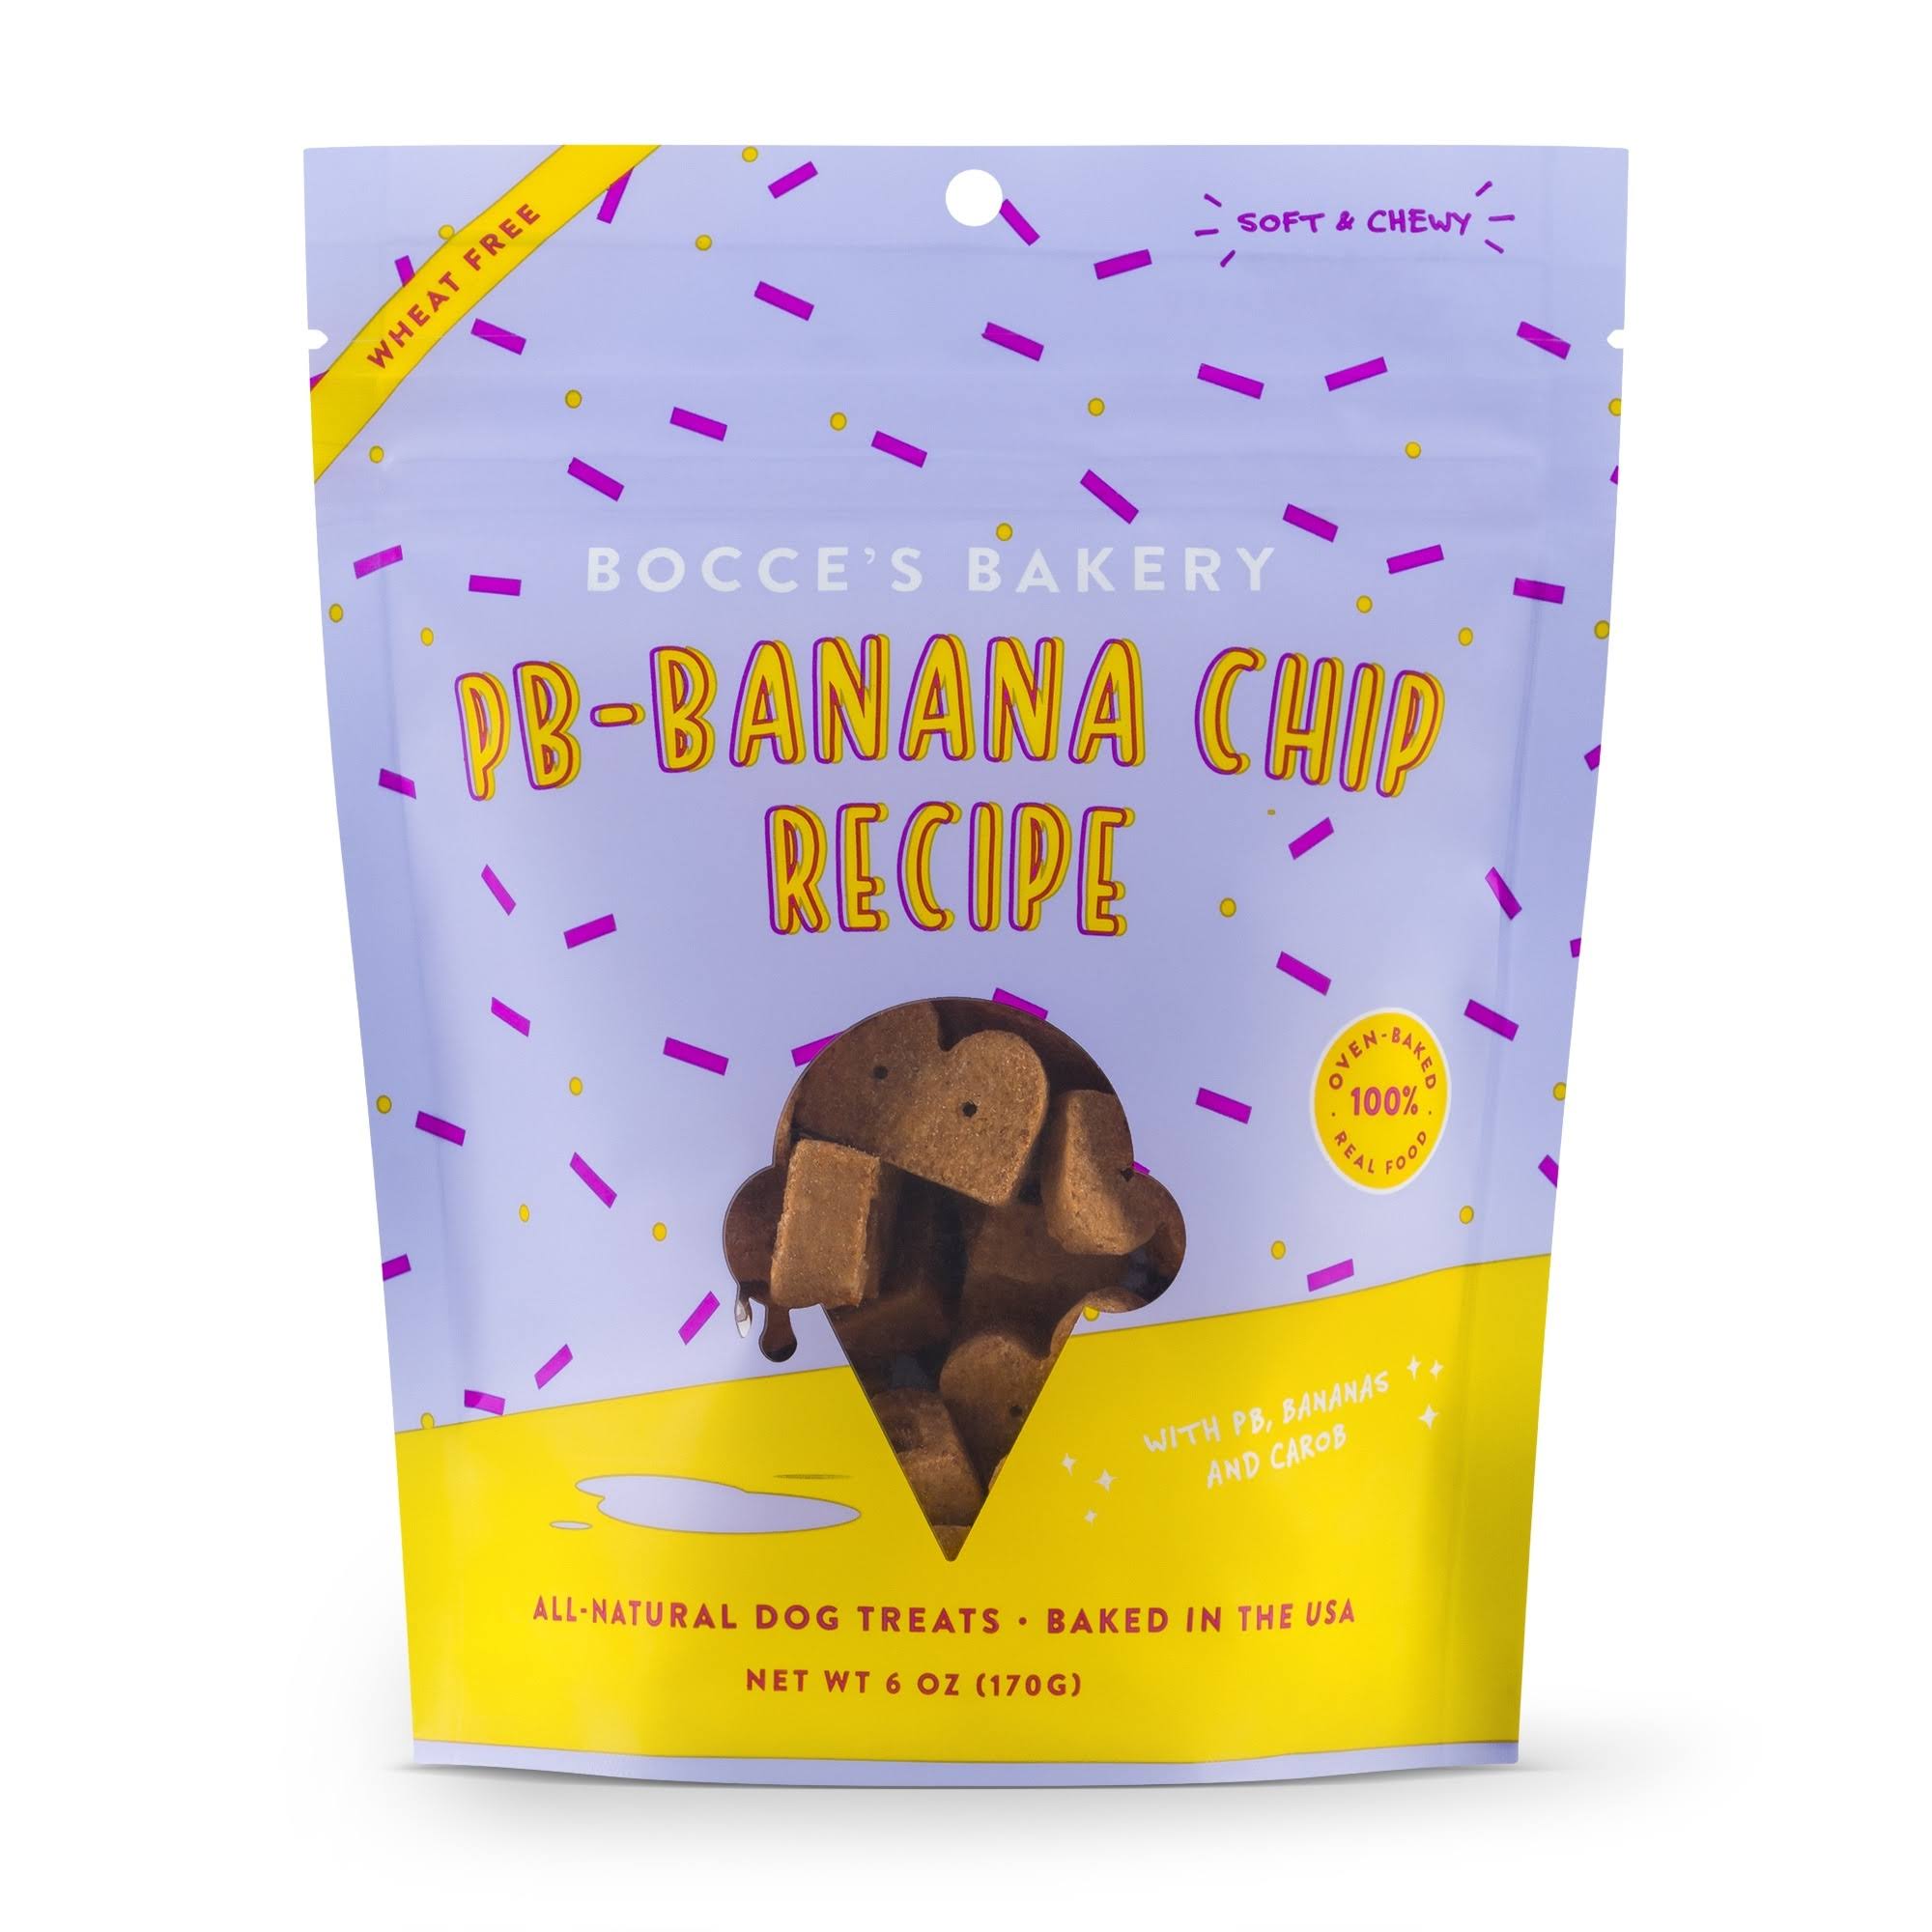 Bocce's Bakery Peanut Butter Banana Chip Soft & Chewy